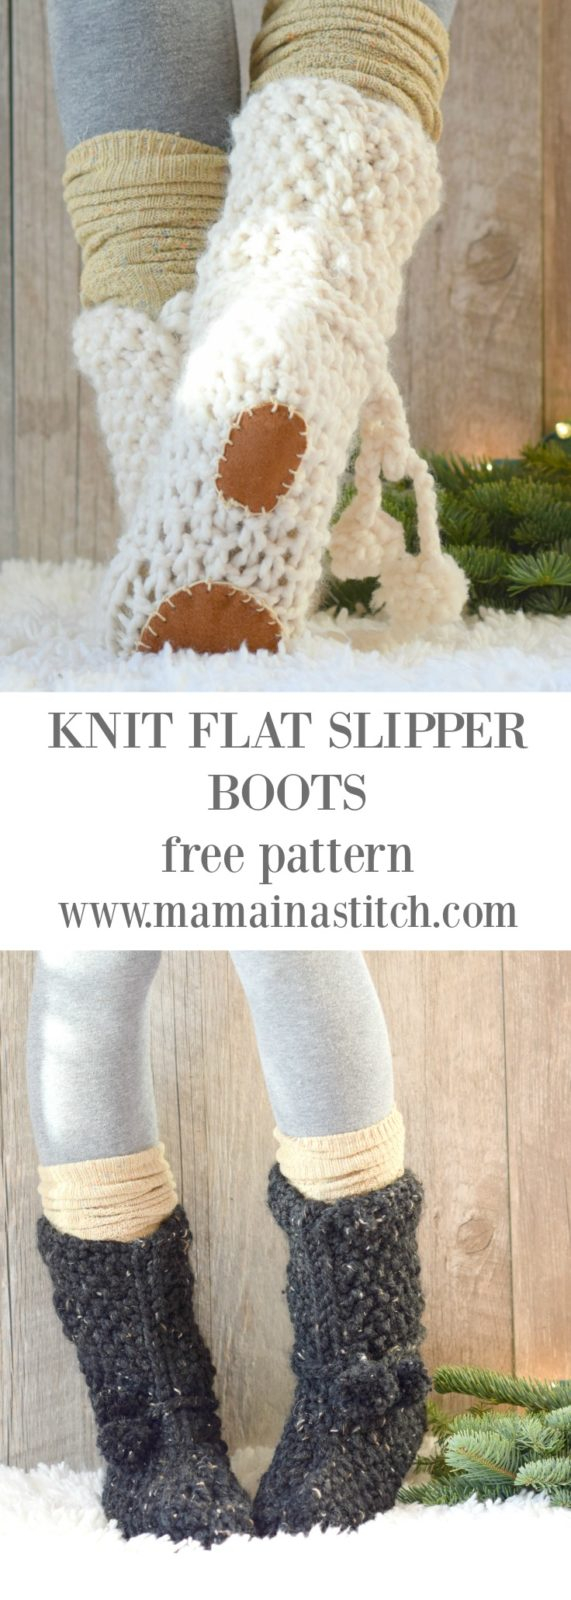 Knitting Patterns For Slipper Boots Mountain Chalet Boot Slipper Knitting Pattern Knit Flat Mama In